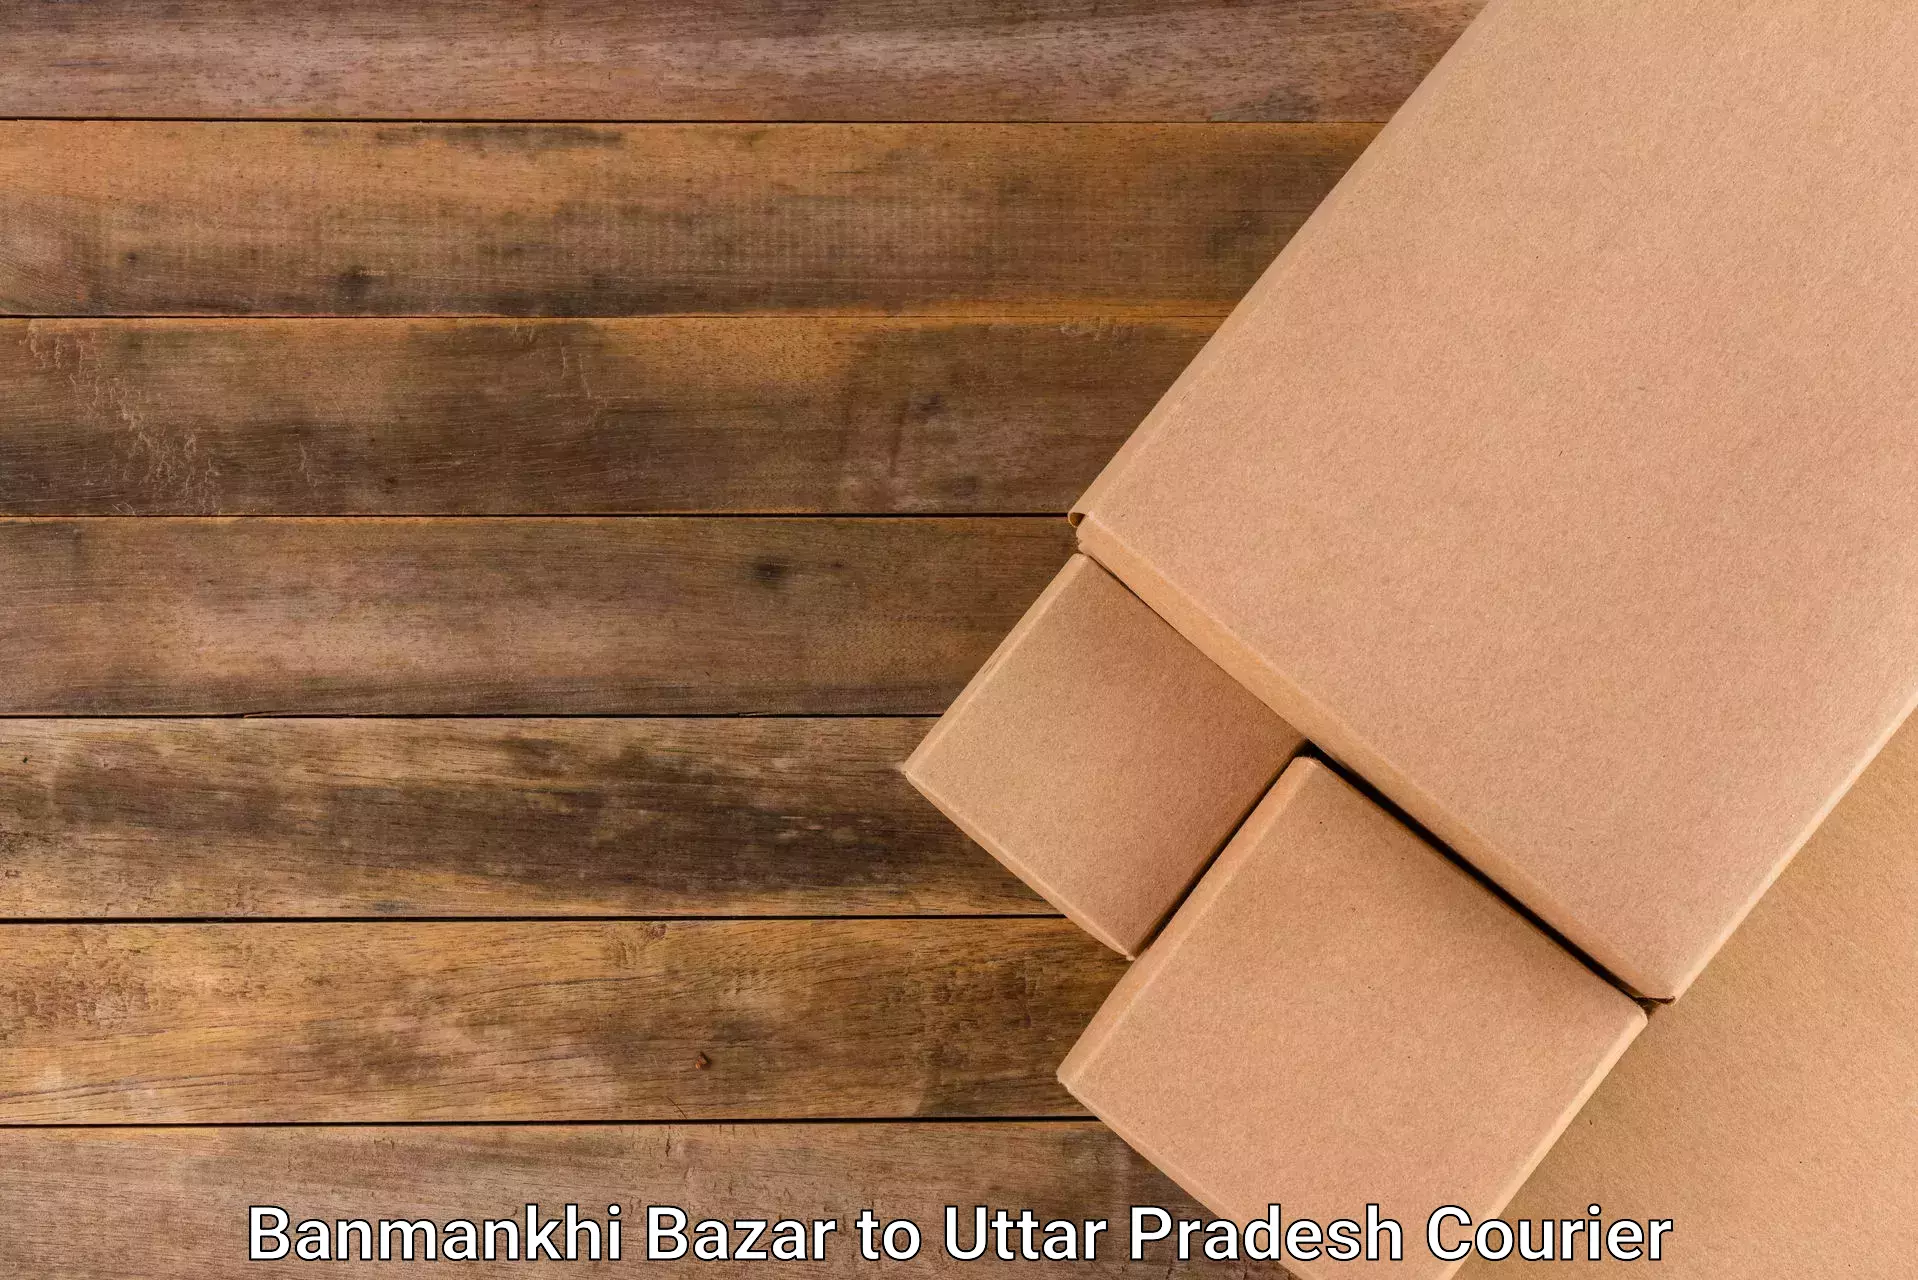 Tailored shipping services in Banmankhi Bazar to Mathura